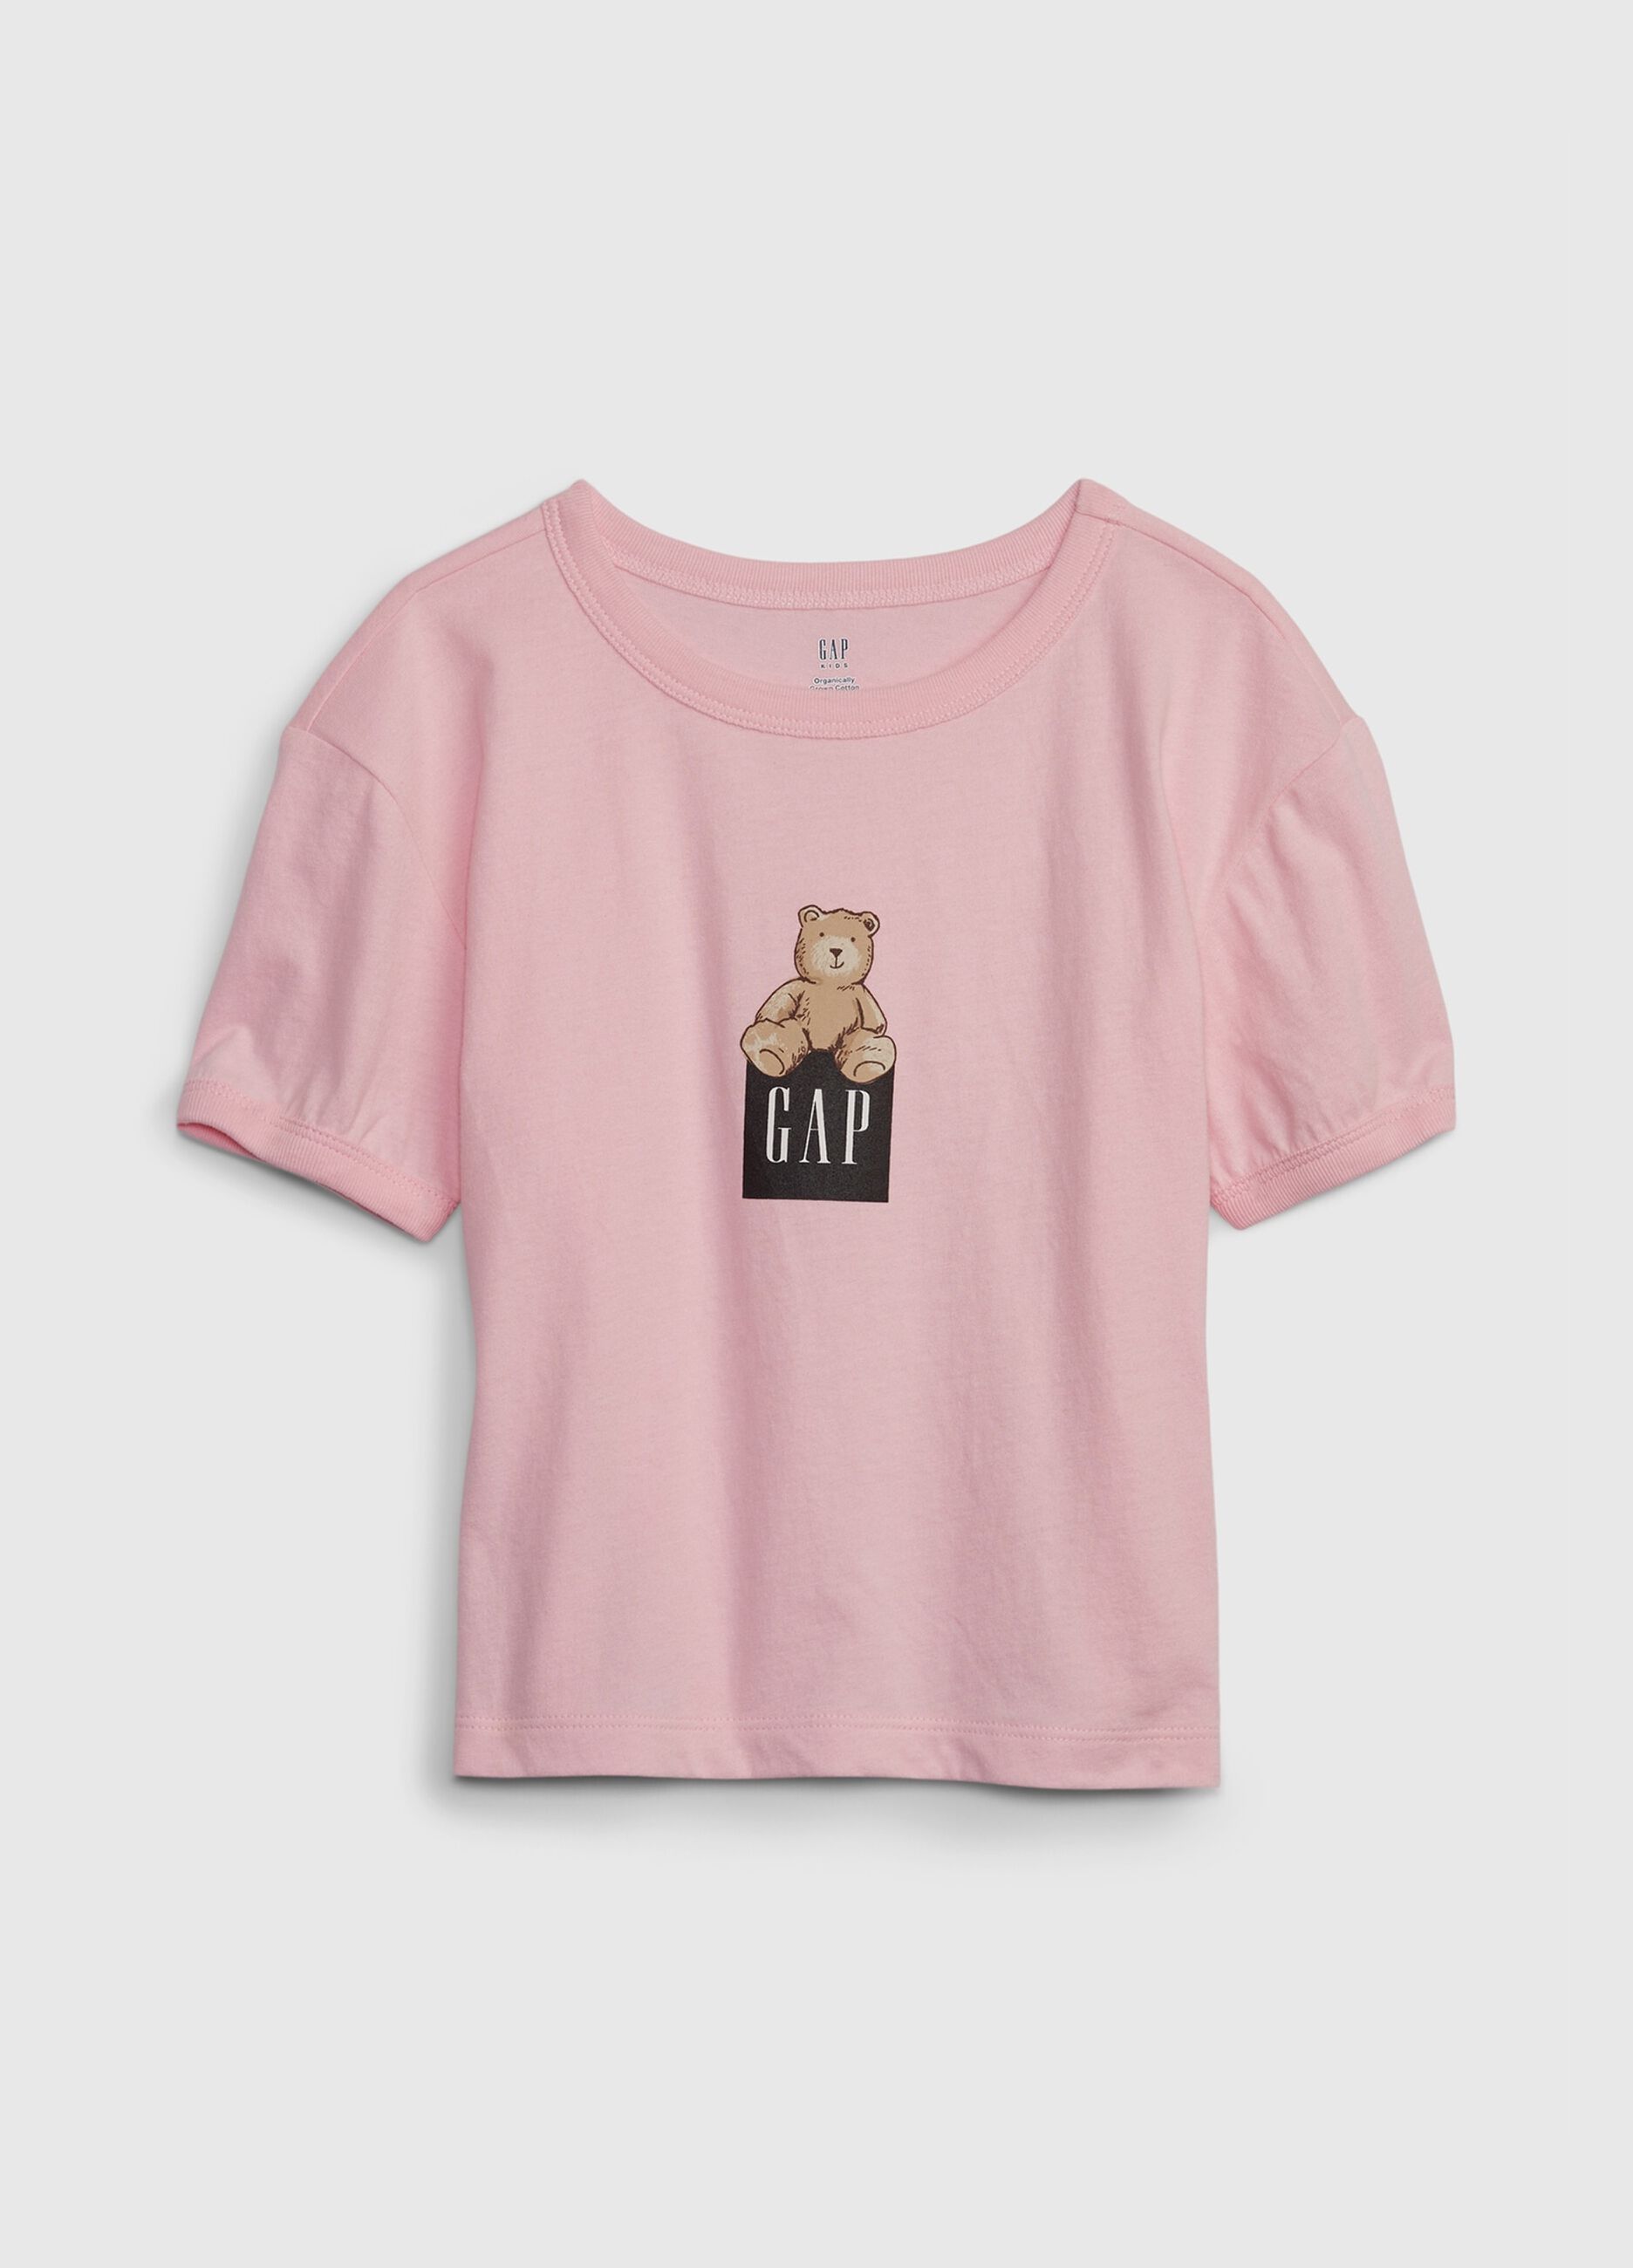 T-shirt in organic cotton with logo and teddy bear print